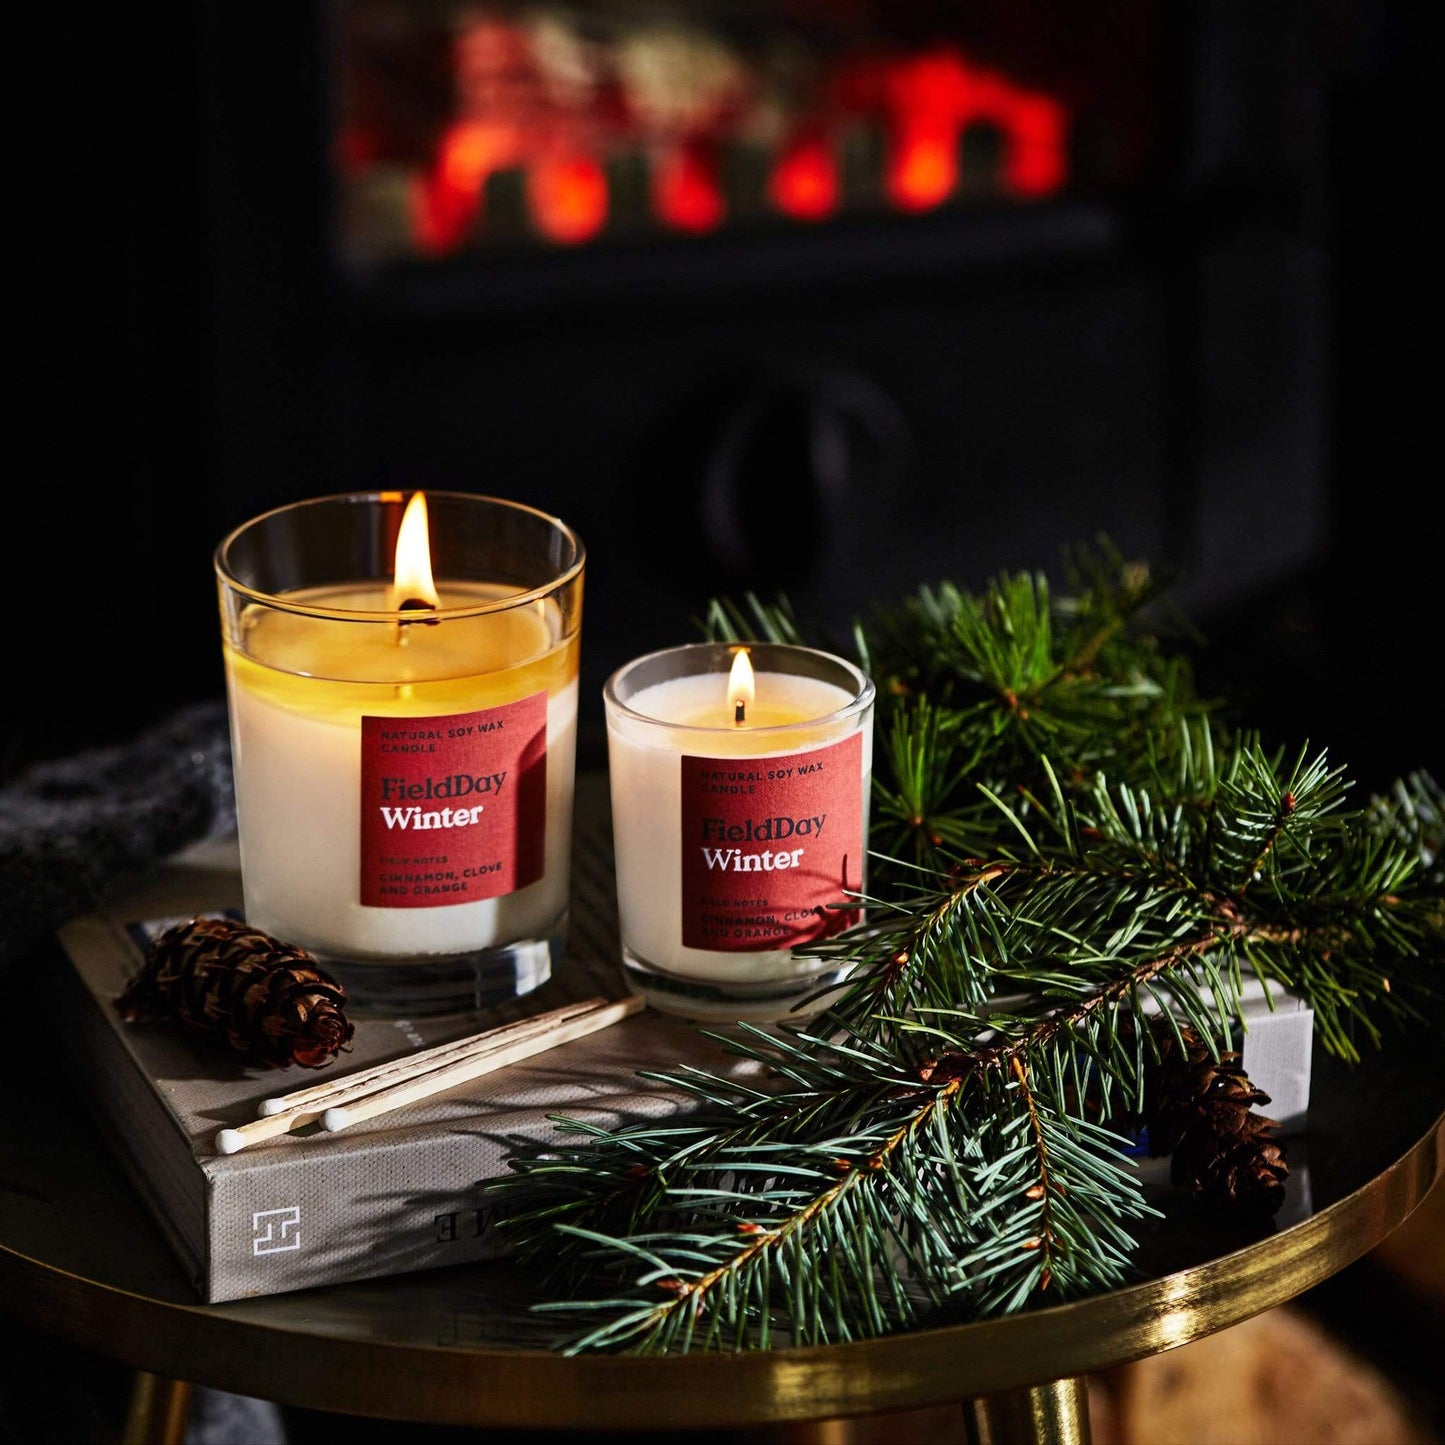 FieldDay Candles FieldDay Small Winter Candle - Cinnamon, Orange & Clove 190g/20 hours